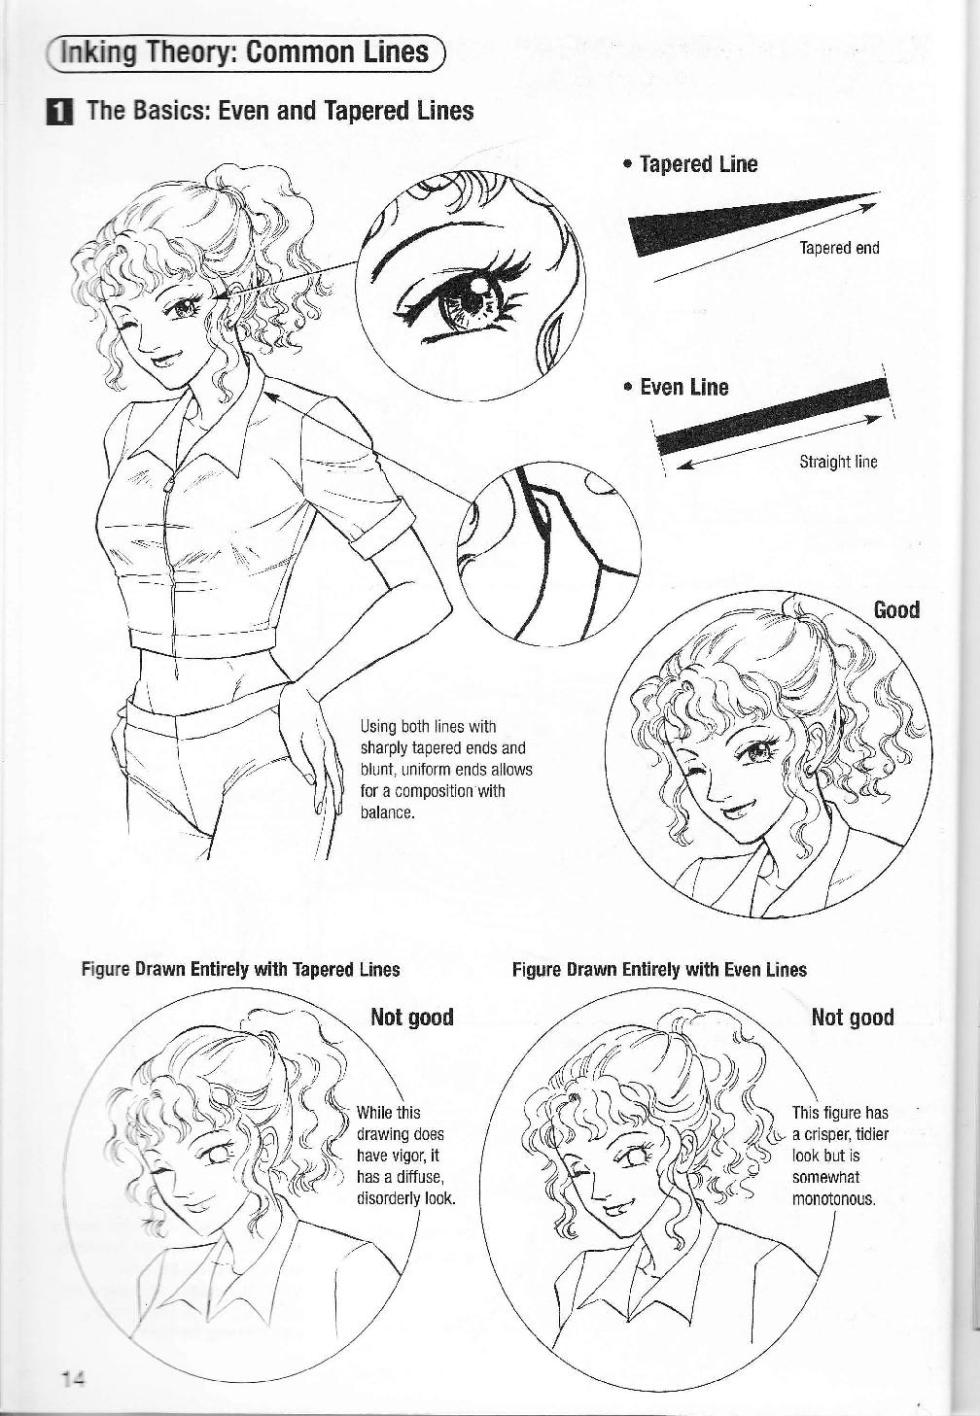 More How to Draw Manga Vol. 2 - Penning Characters - Page 16